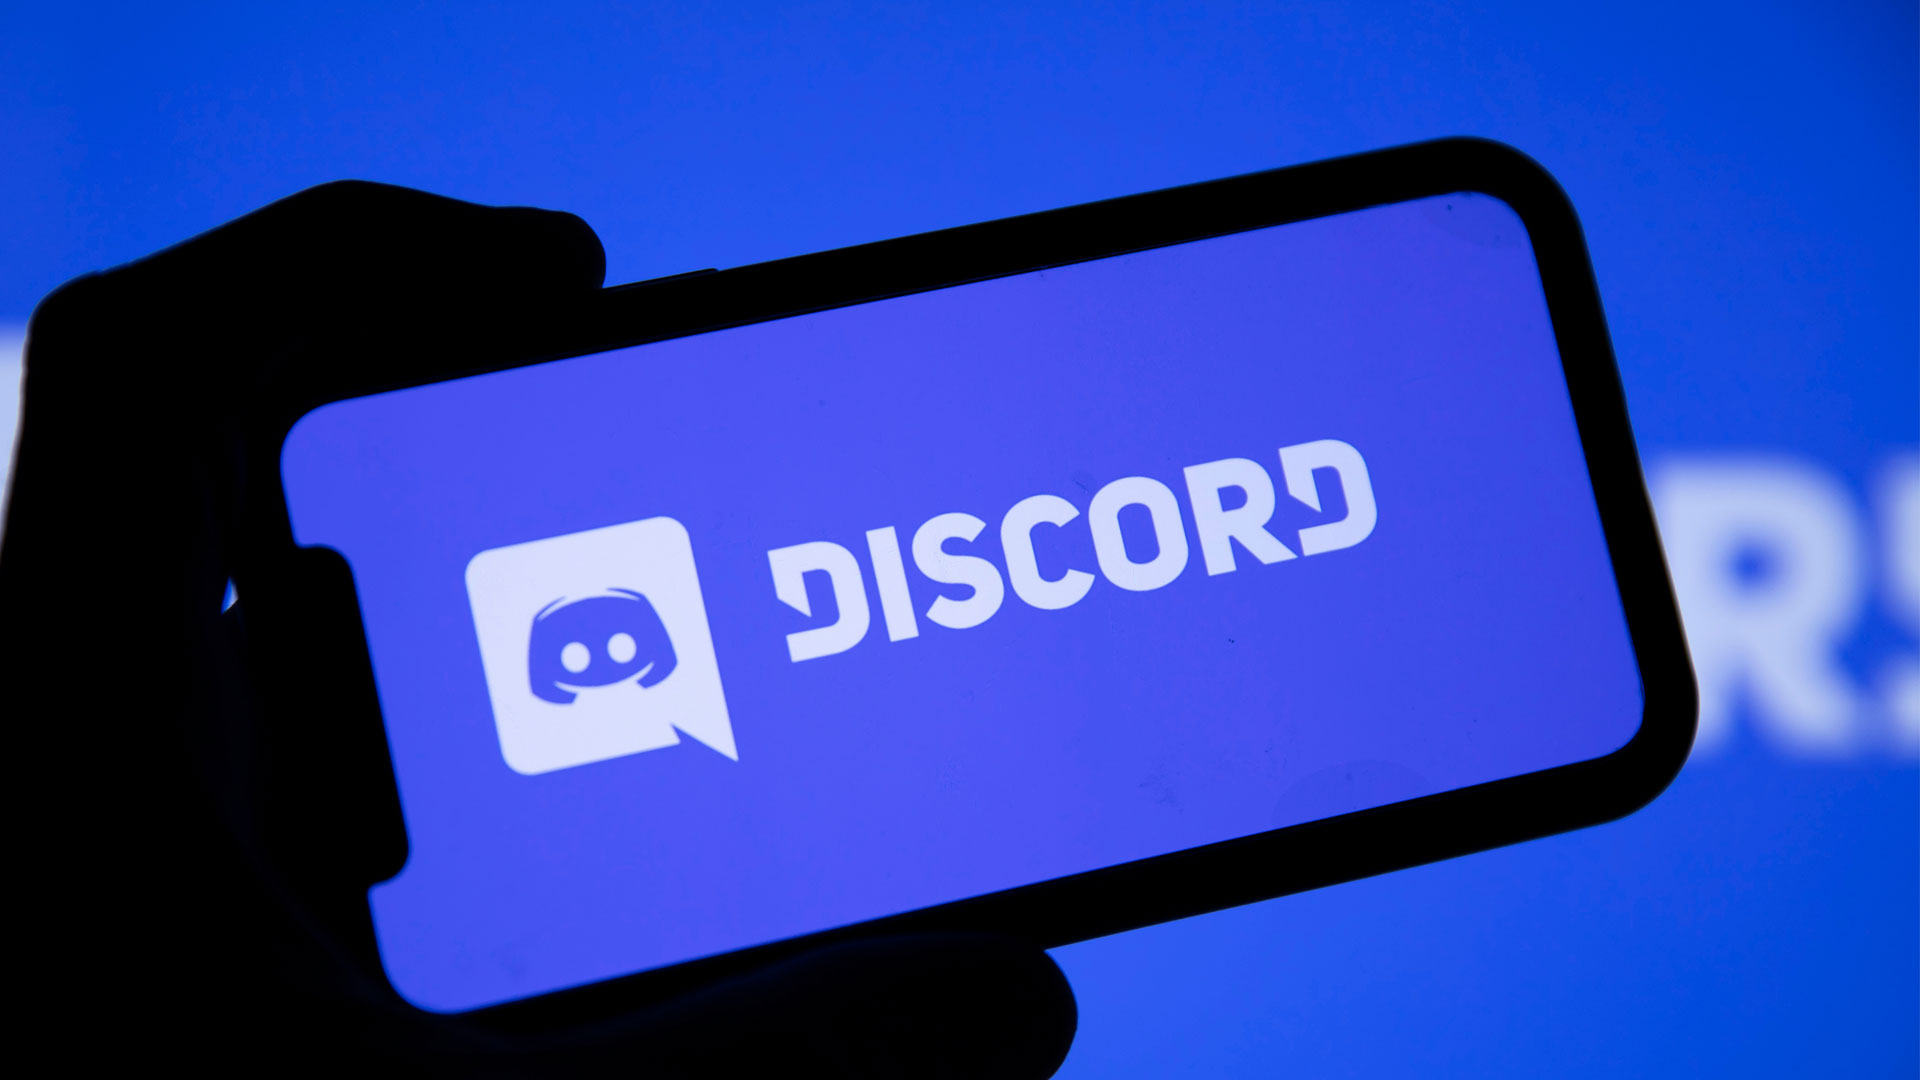 discord search not working